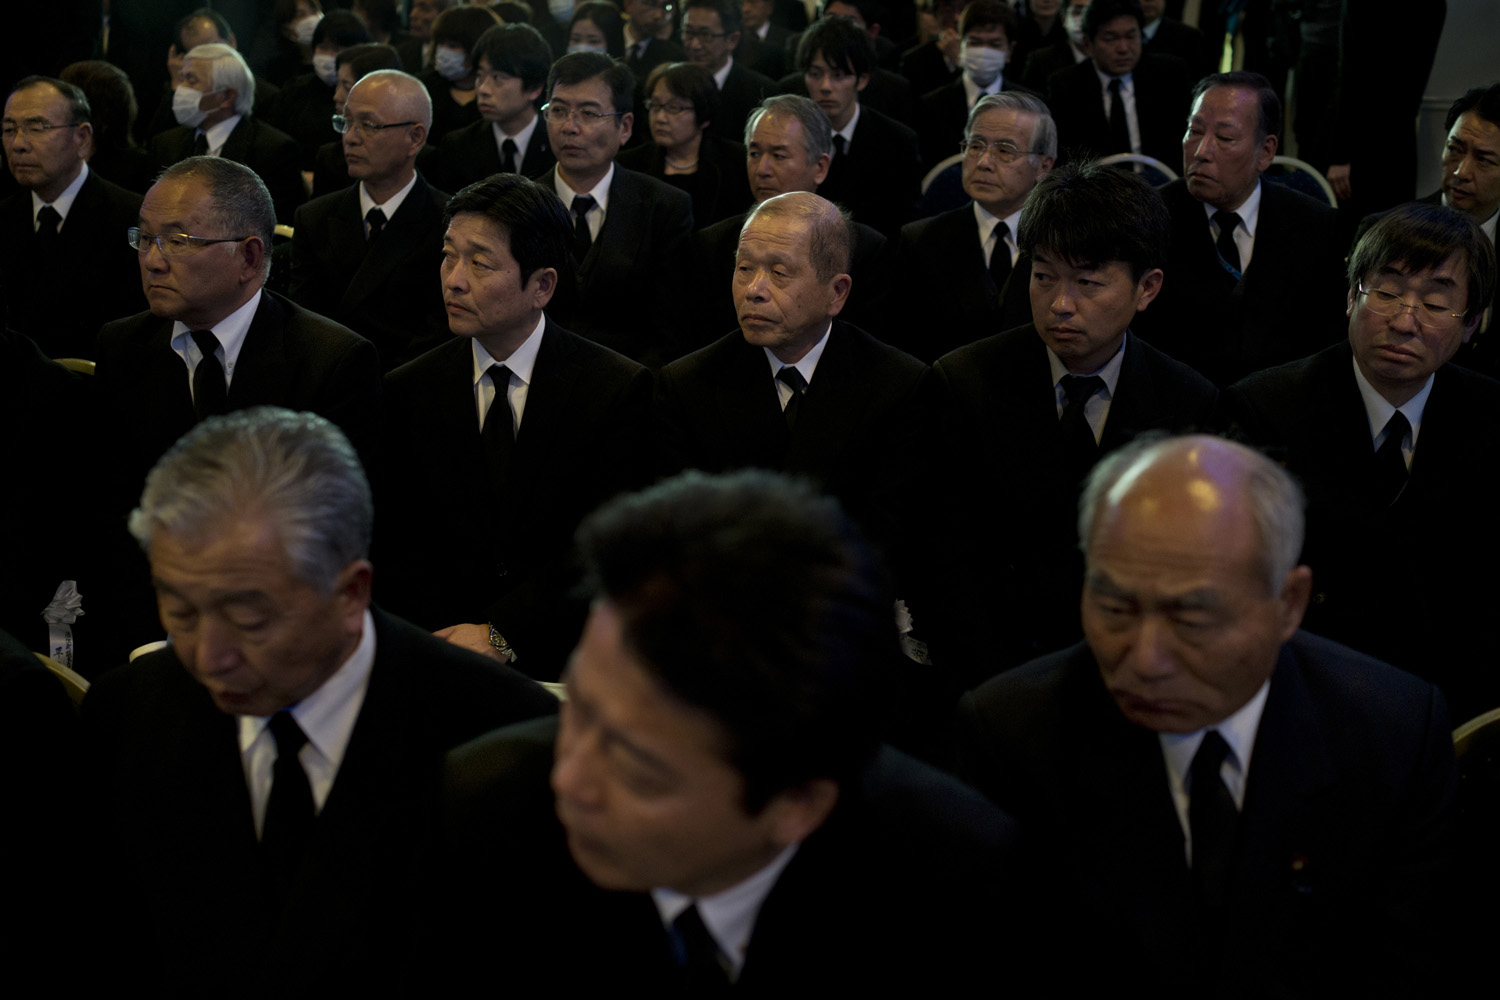 Japan, Namie, 2014. Residents from Namie attend a memorial service on the third anniversary of the earthquake and tsunami, which hit the northeastern coast of Japan in March 2011. The ceremony is held inside the 20- kilometer exclusion zone around the crippled Fukushima Daiichi Nuclear Power Plant.